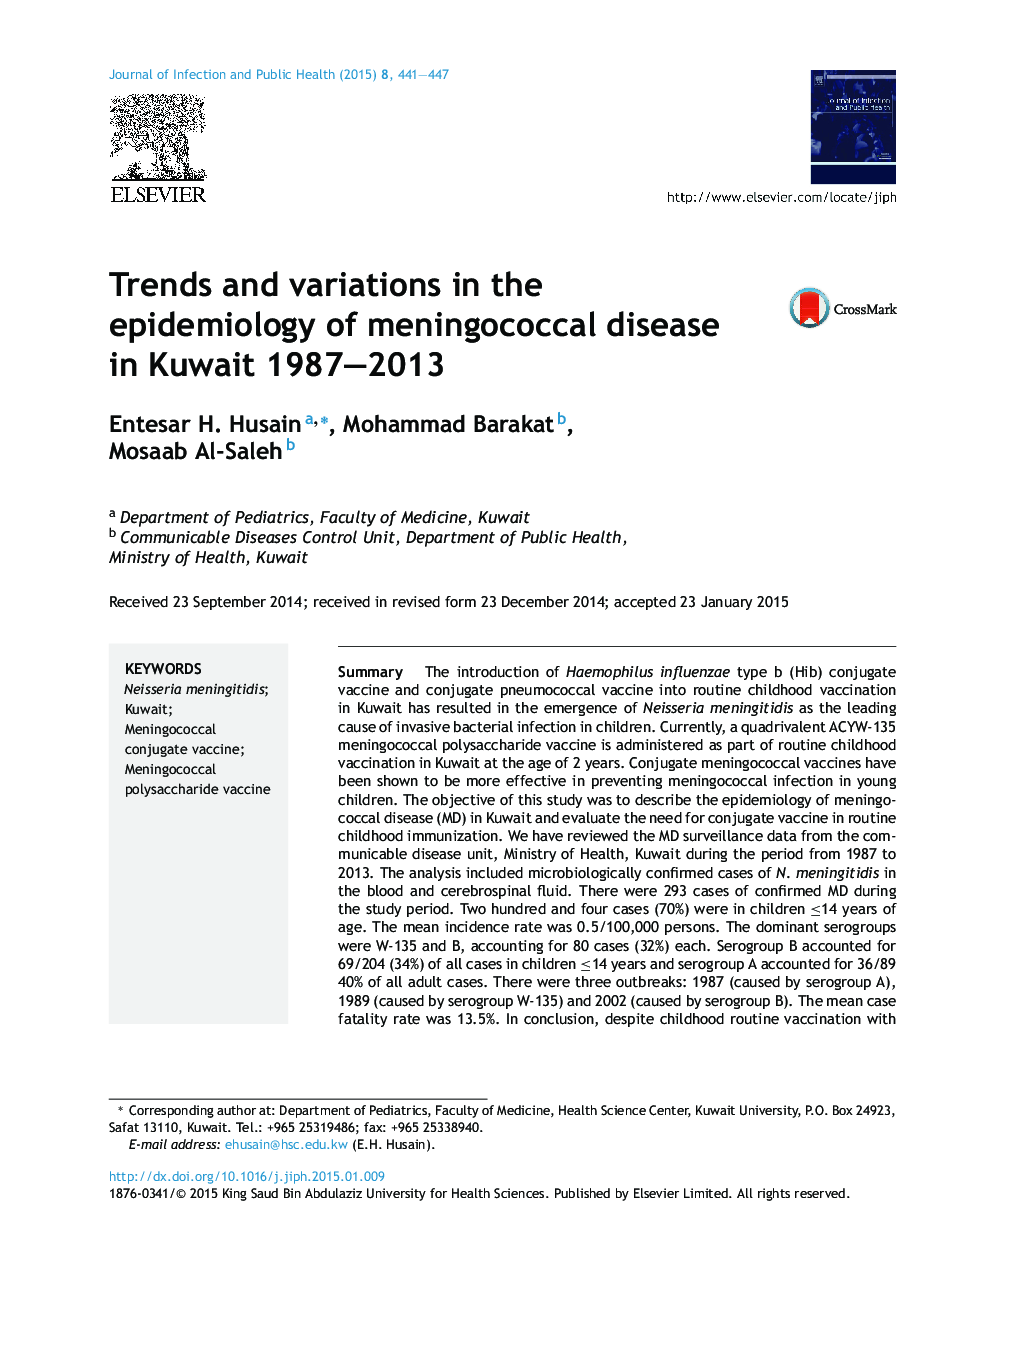 Trends and variations in the epidemiology of meningococcal disease in Kuwait 1987–2013